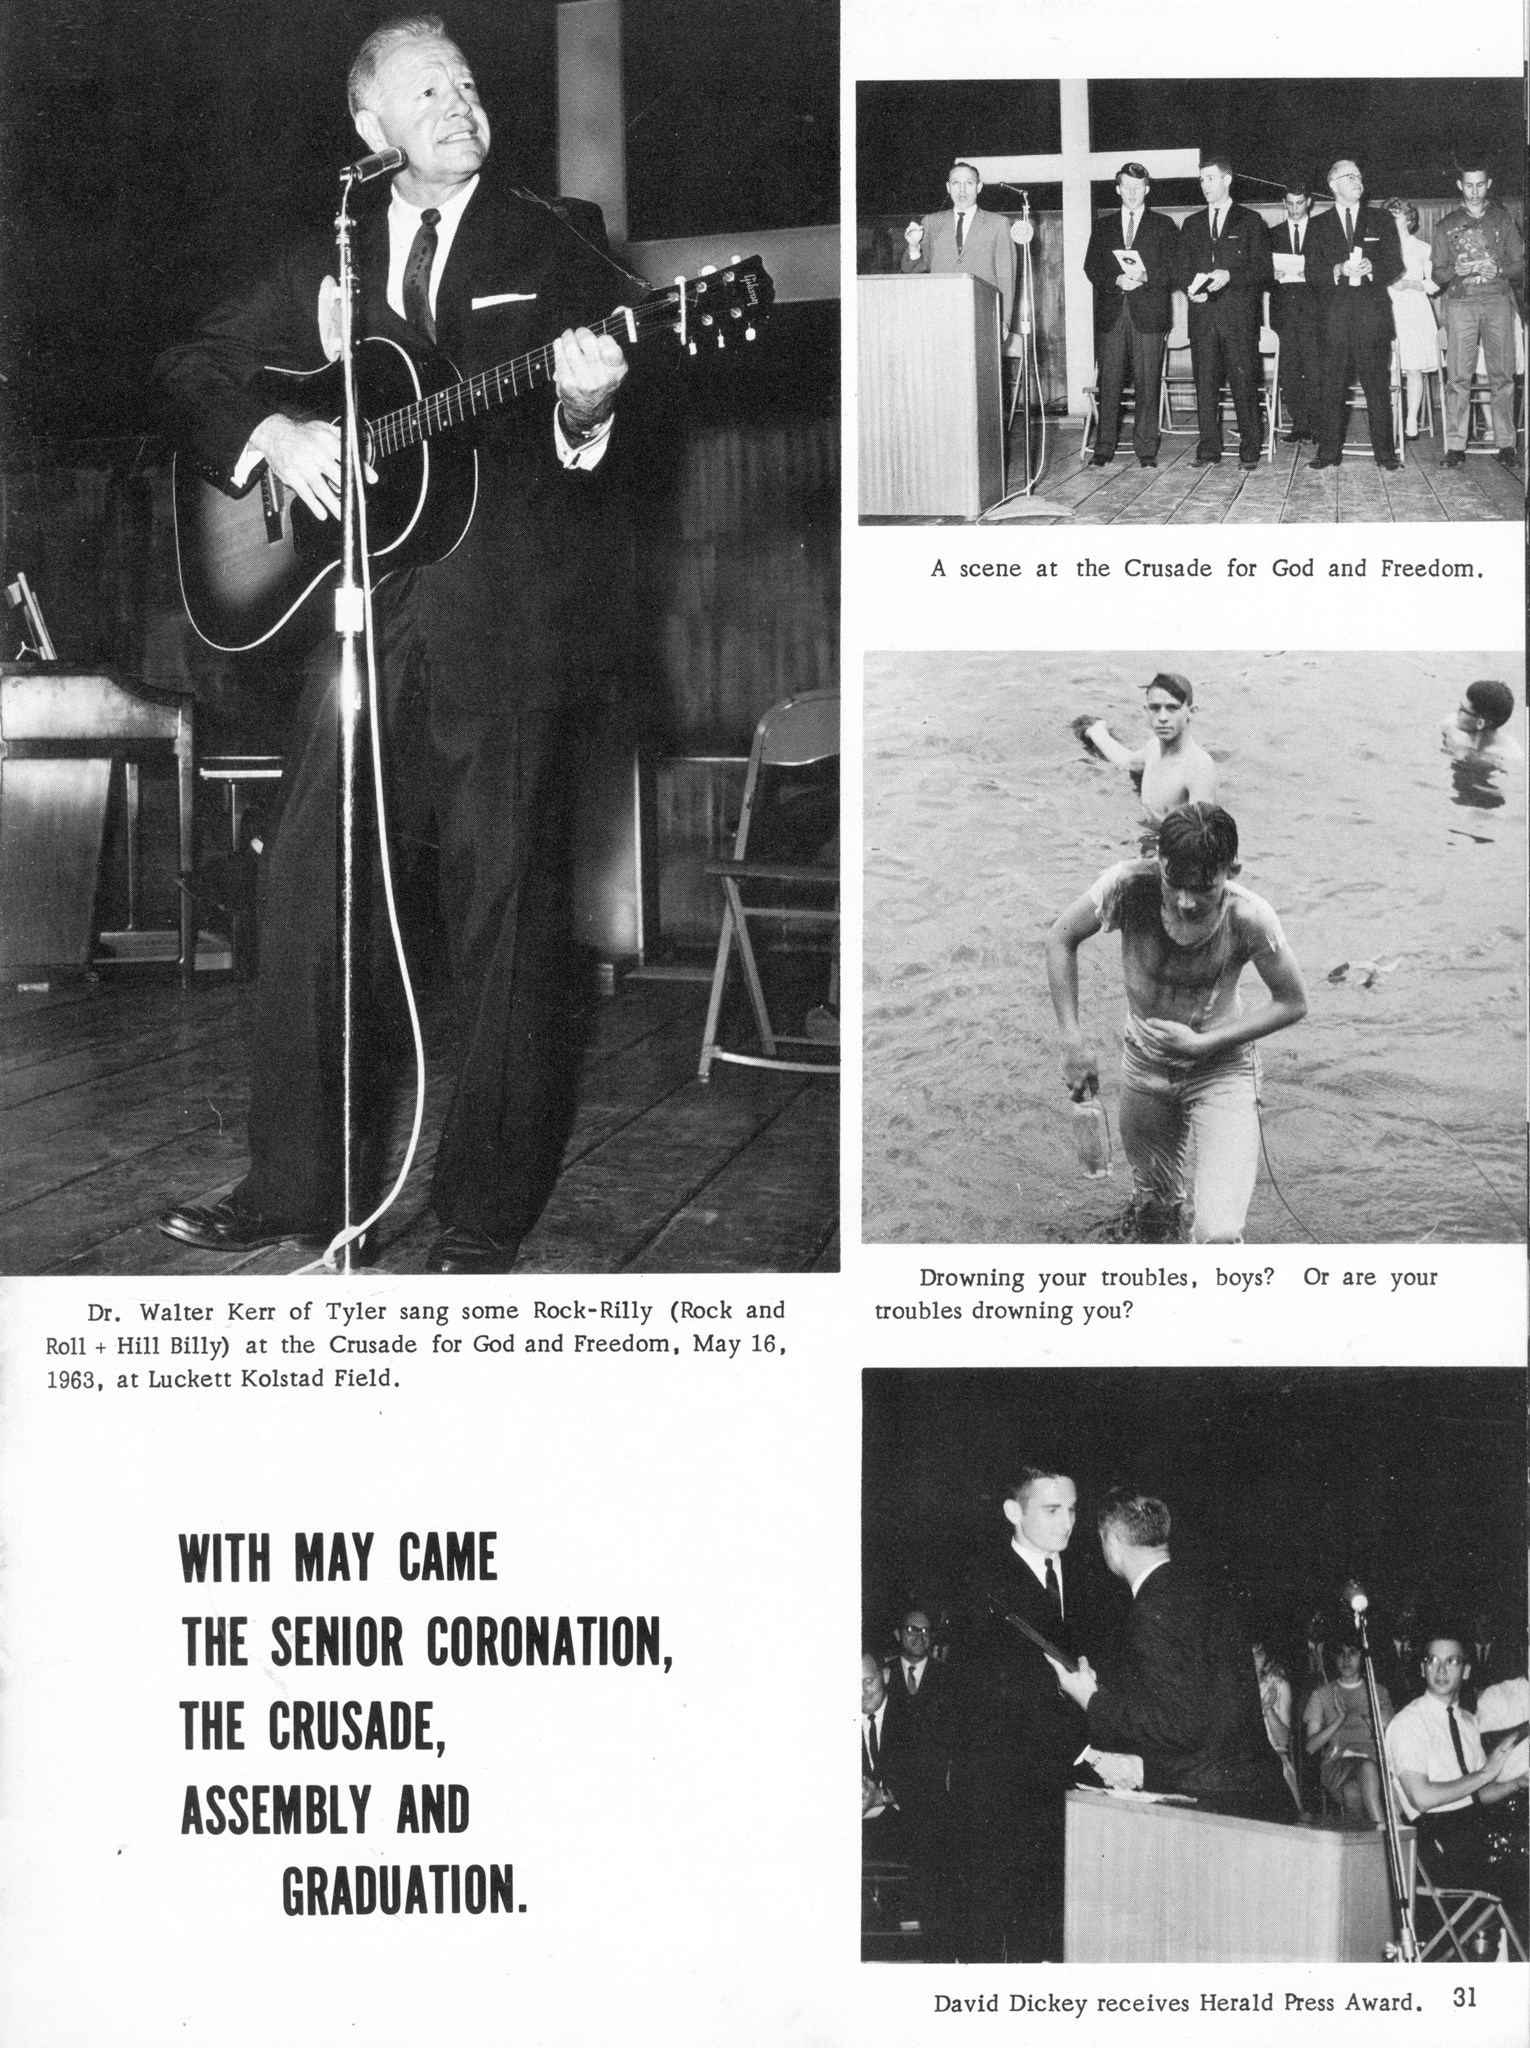 ../../../Images/Large/1963/Arclight-1963-pg0031.jpg